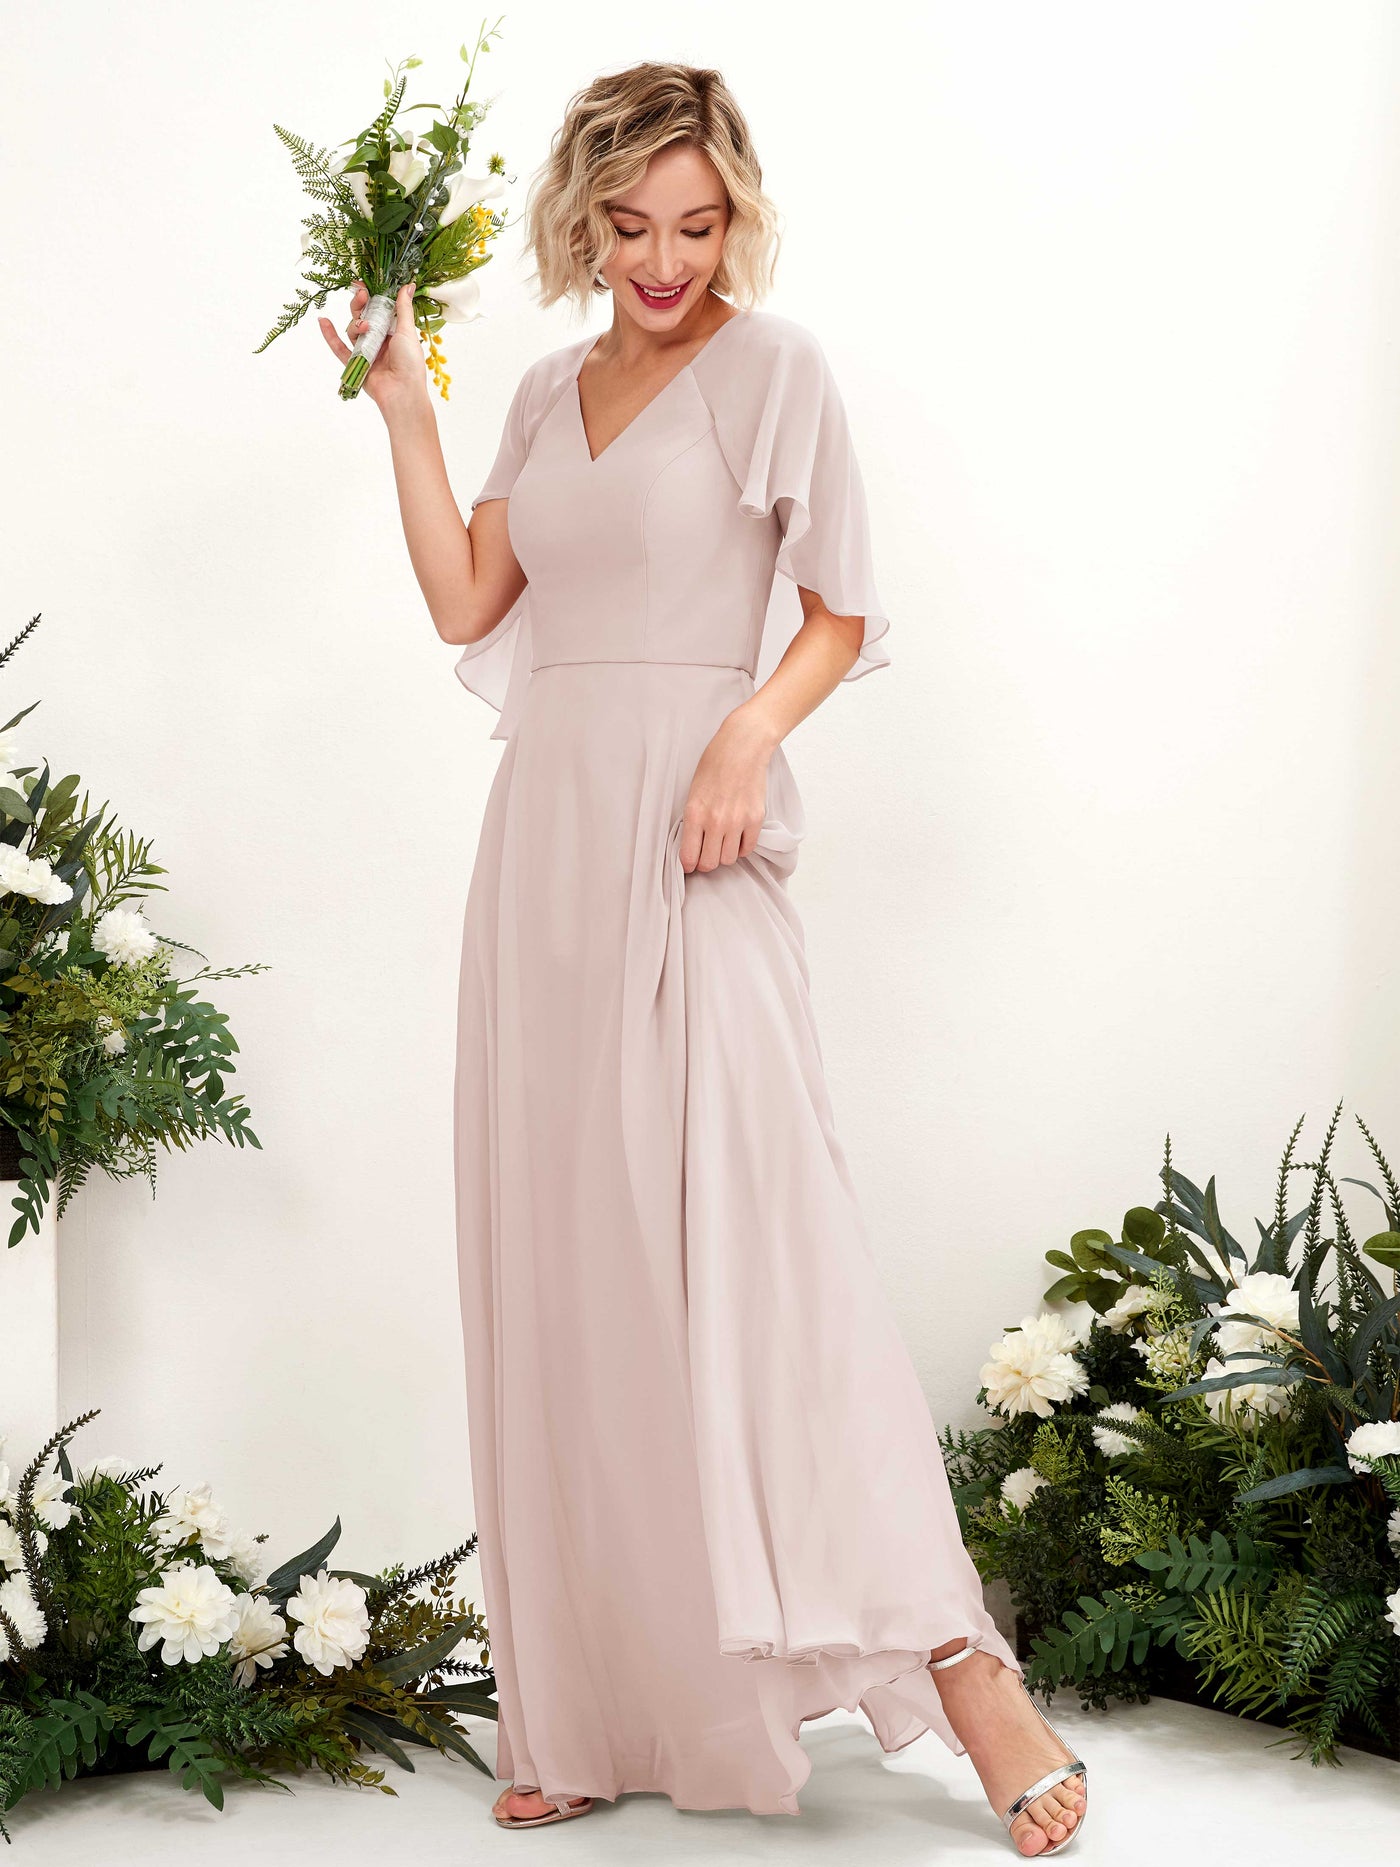 Biscotti Bridesmaid Dresses Bridesmaid Dress A-line Chiffon V-neck Full Length Short Sleeves Wedding Party Dress (81224435)#color_biscotti